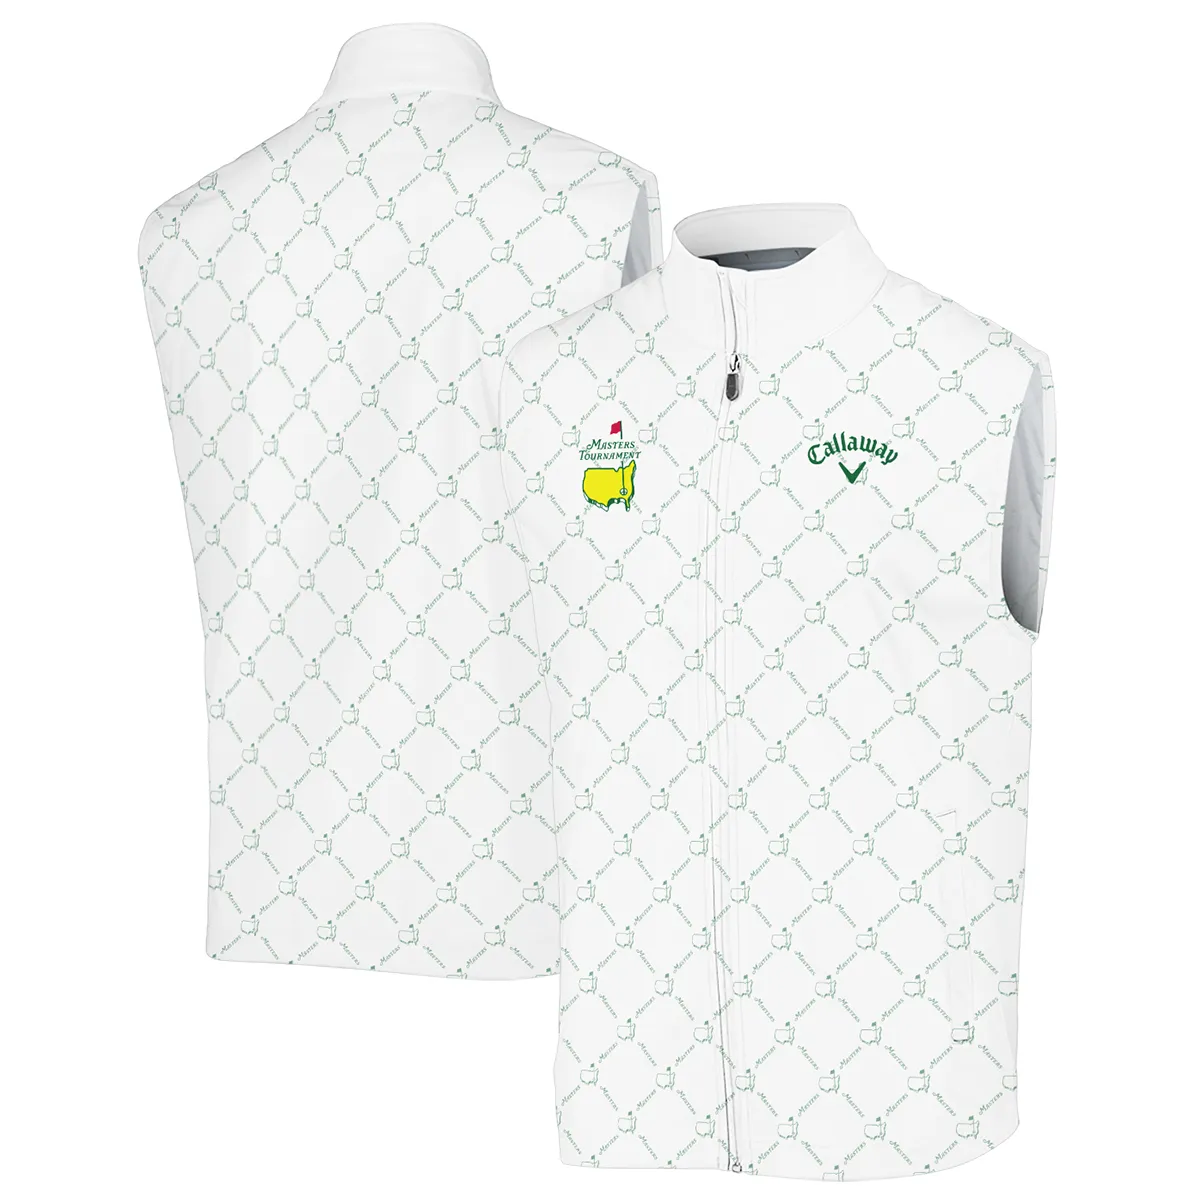 Golf Sport Pattern Color White Mix Masters Tournament Callaway Sleeveless Jacket Style Classic